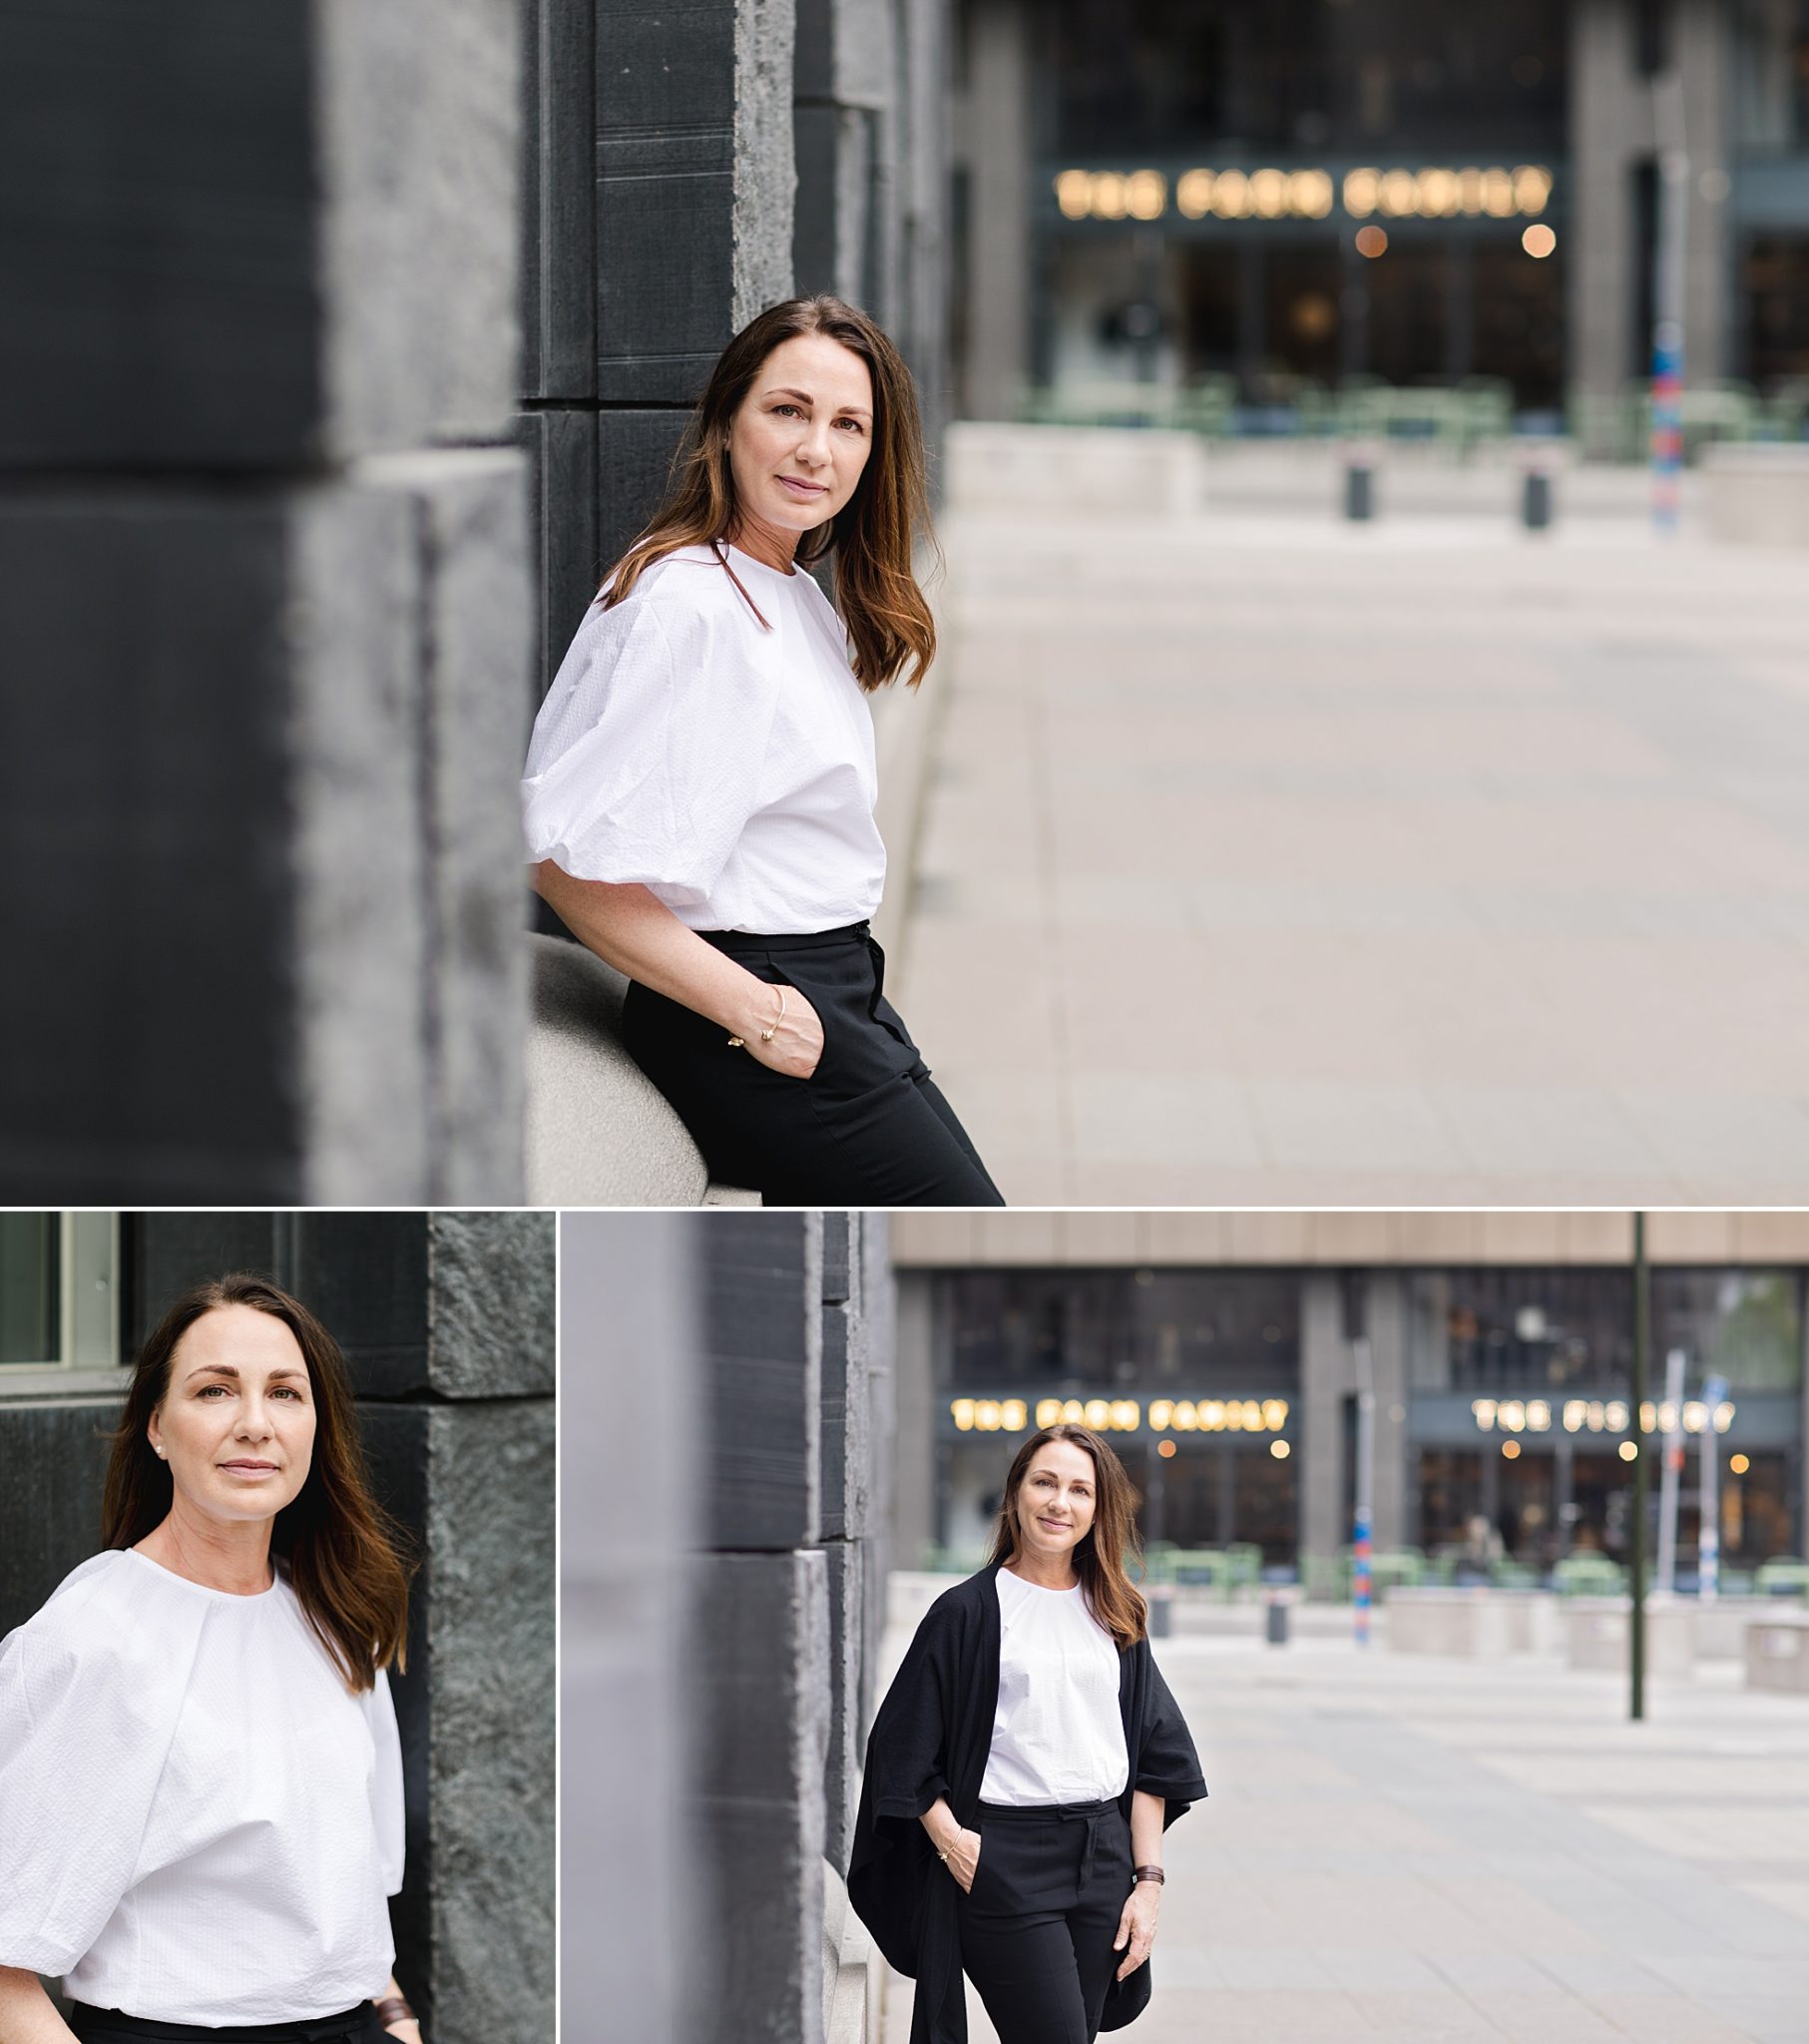 A female IT professional at Brunkebergstorg, a beautiful photo shoot location in Stockholm